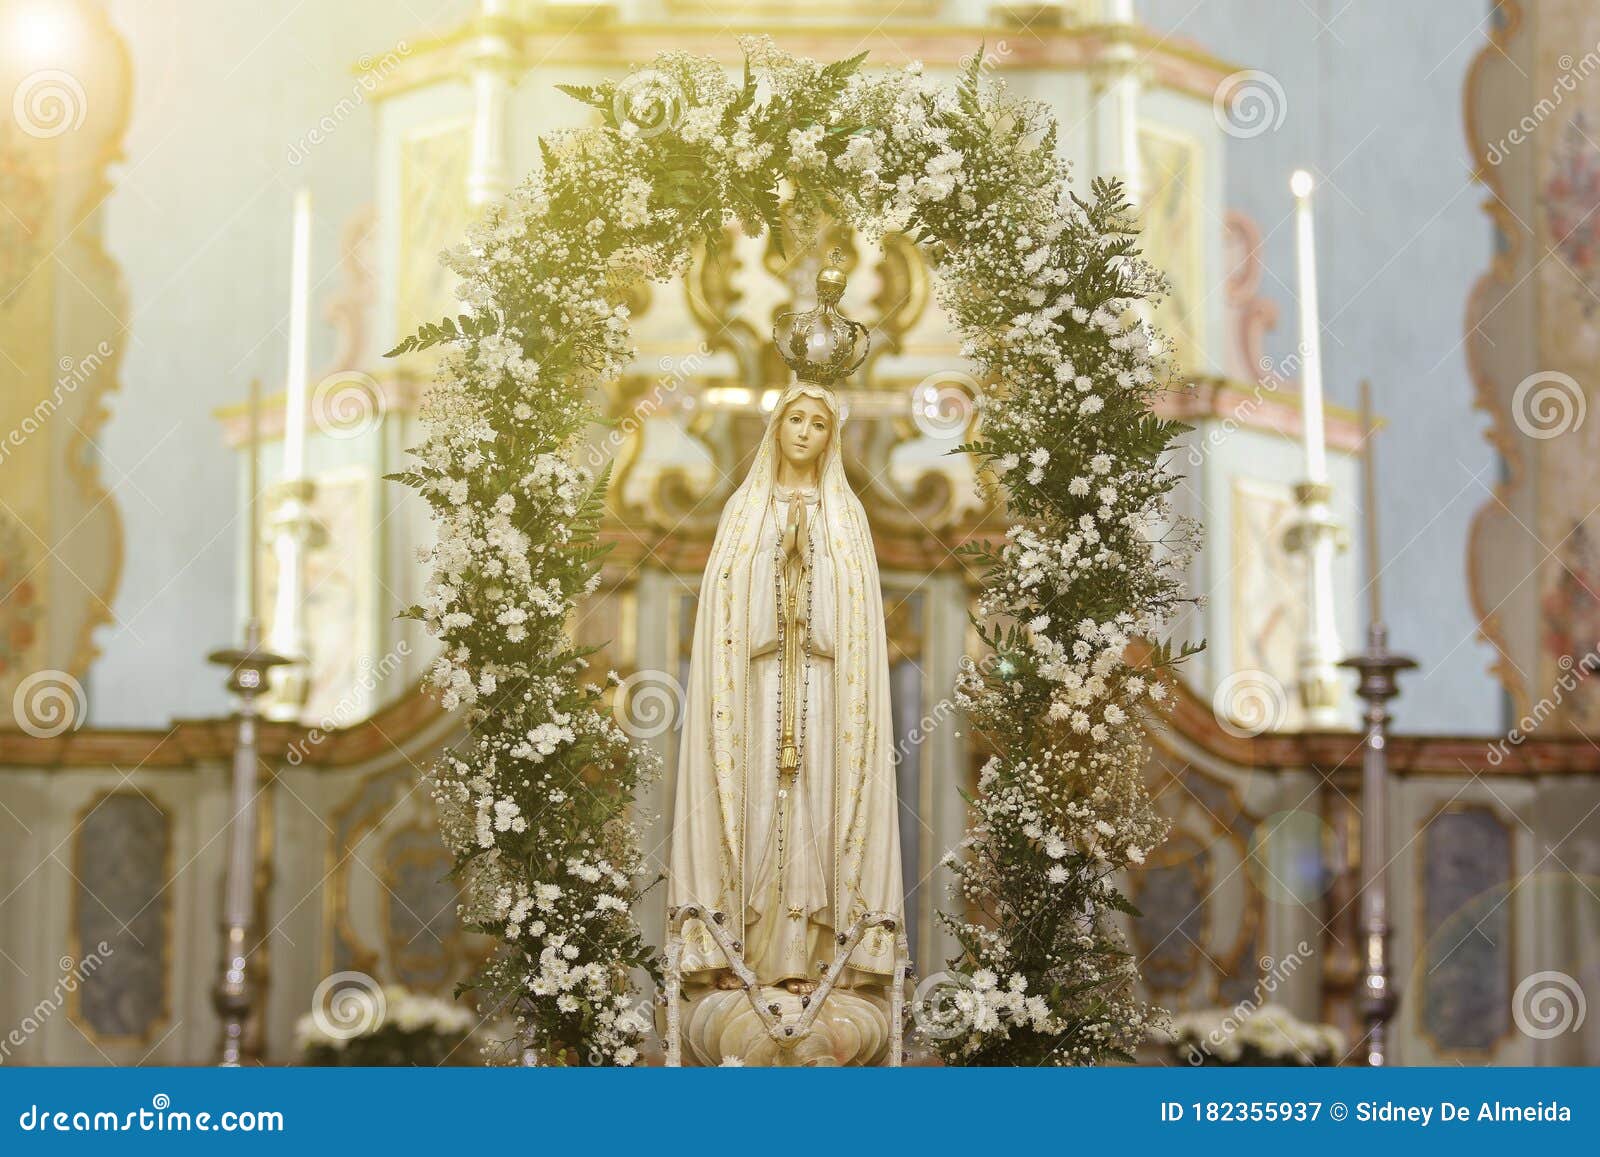 1,780 Our Lady Fatima Photos - Free & Royalty-Free Stock Photos From Dreamstime